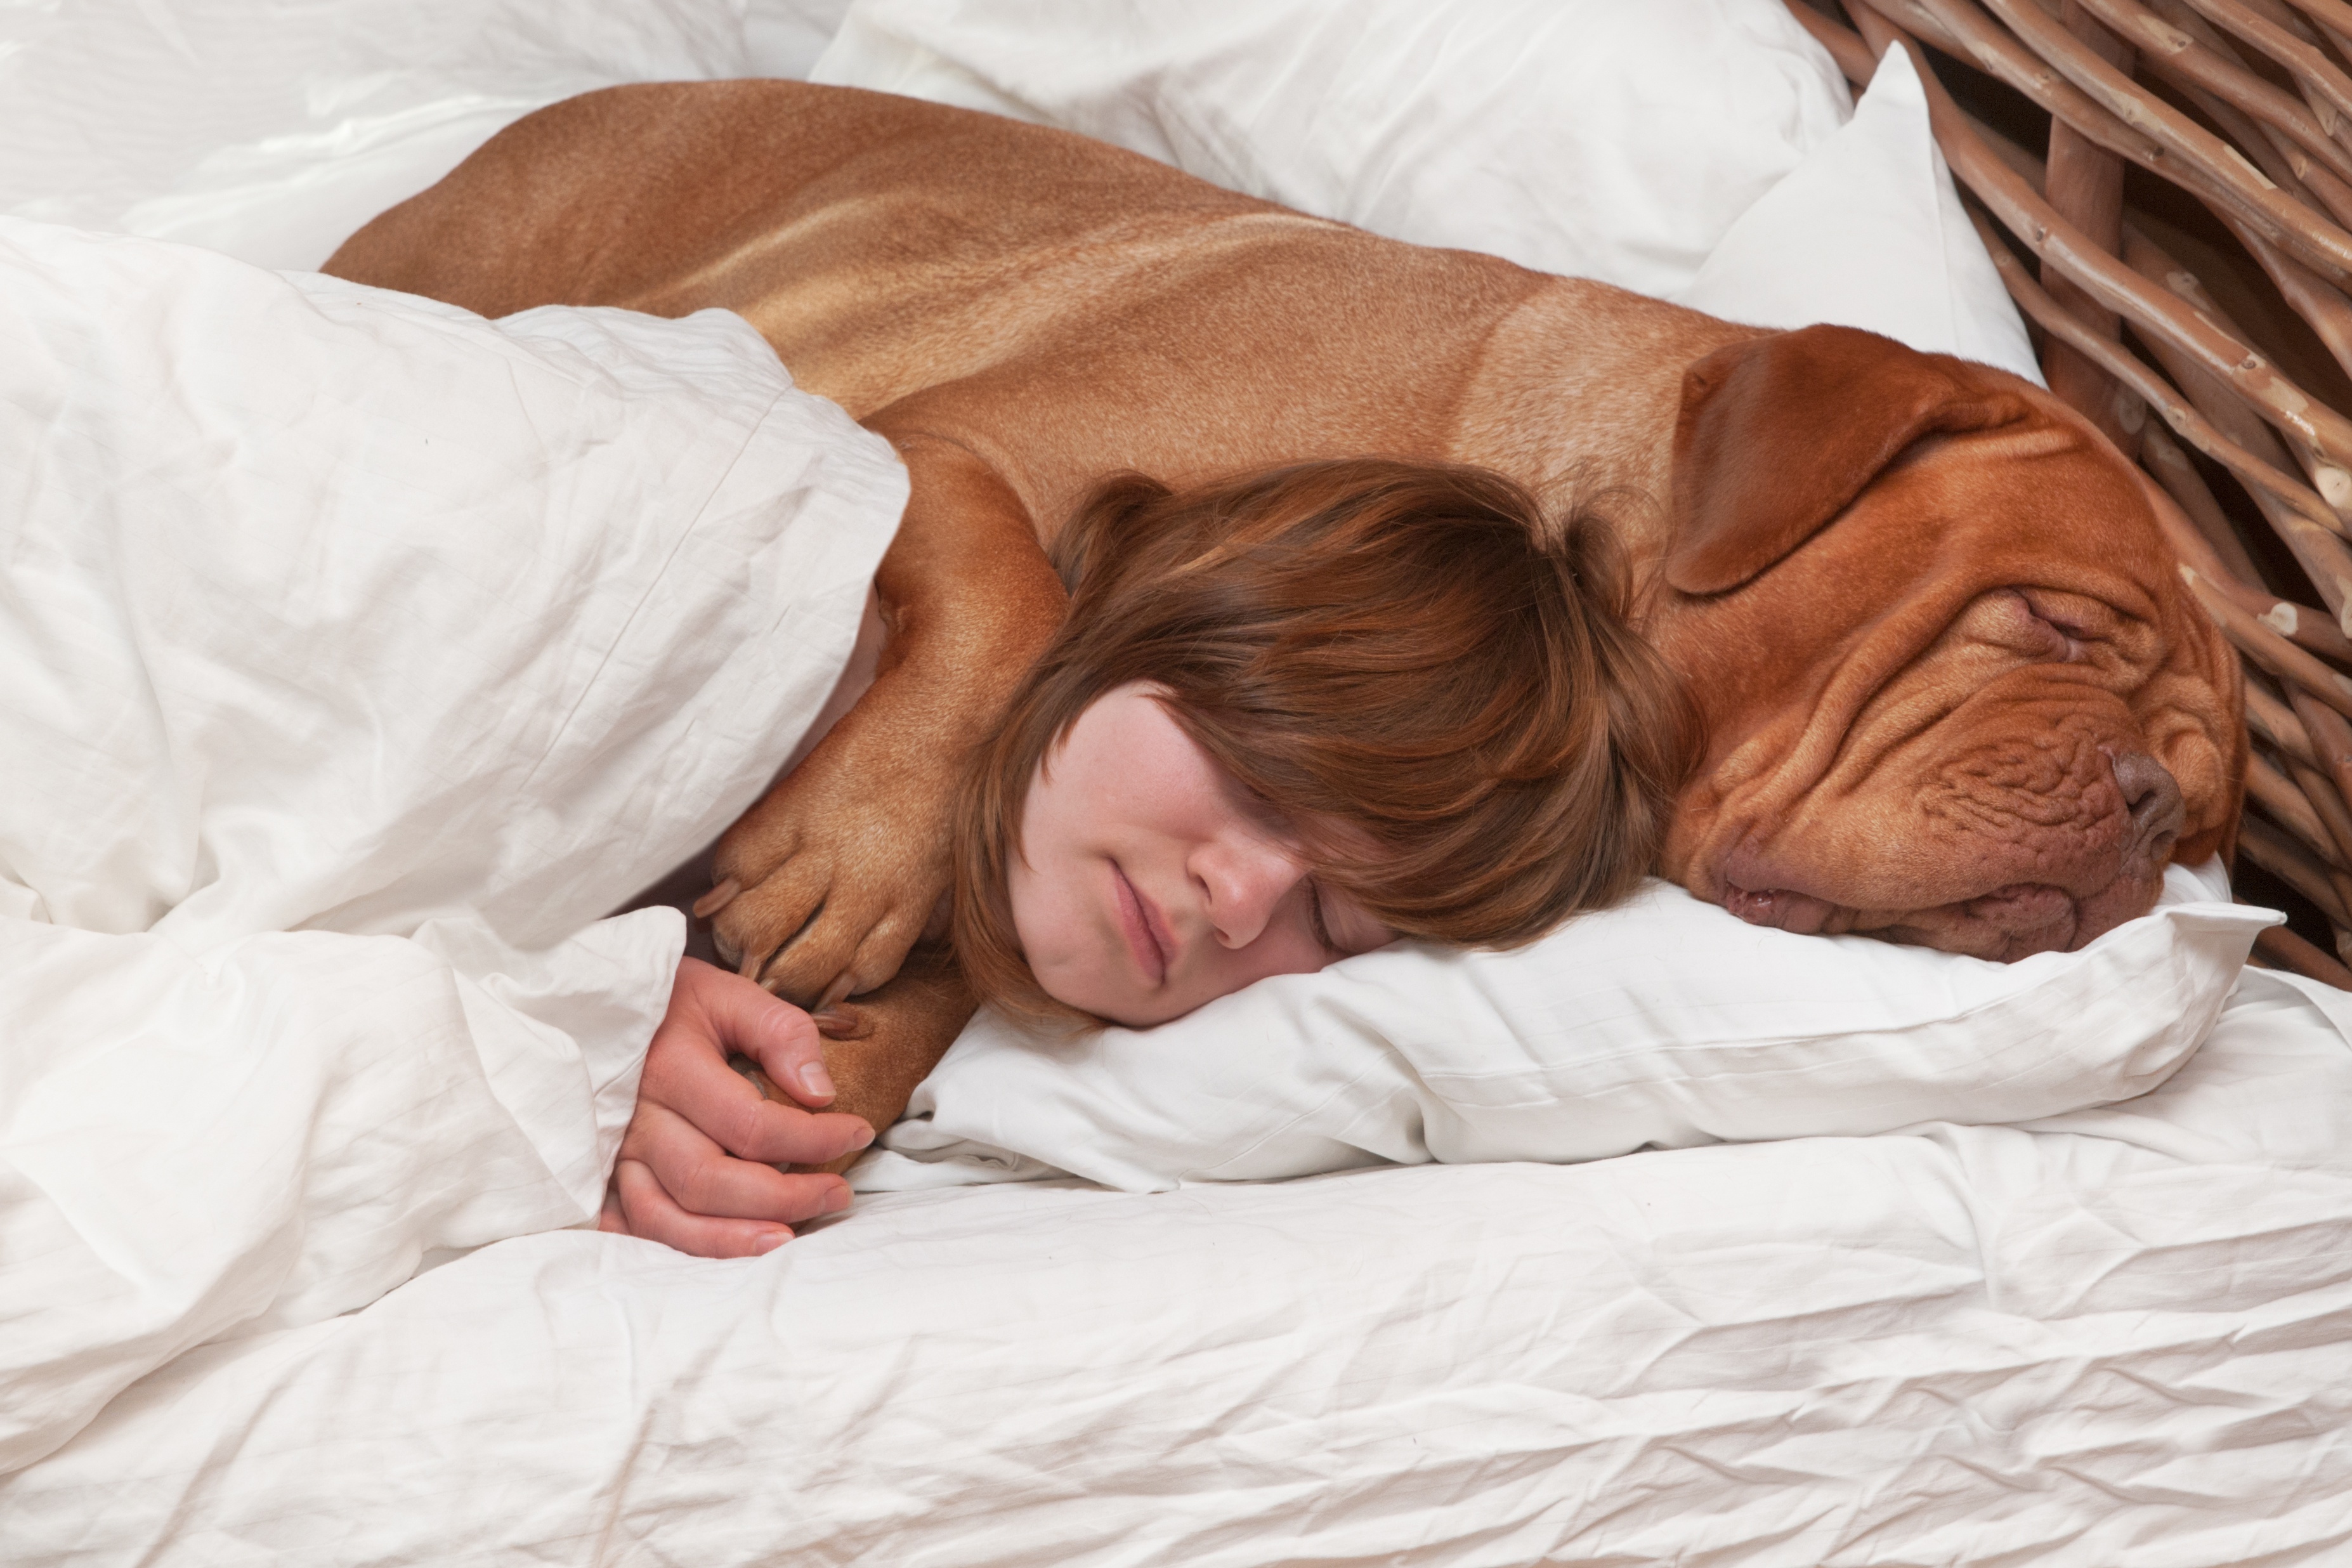 How to Train Your Dog on Bed Etiquette